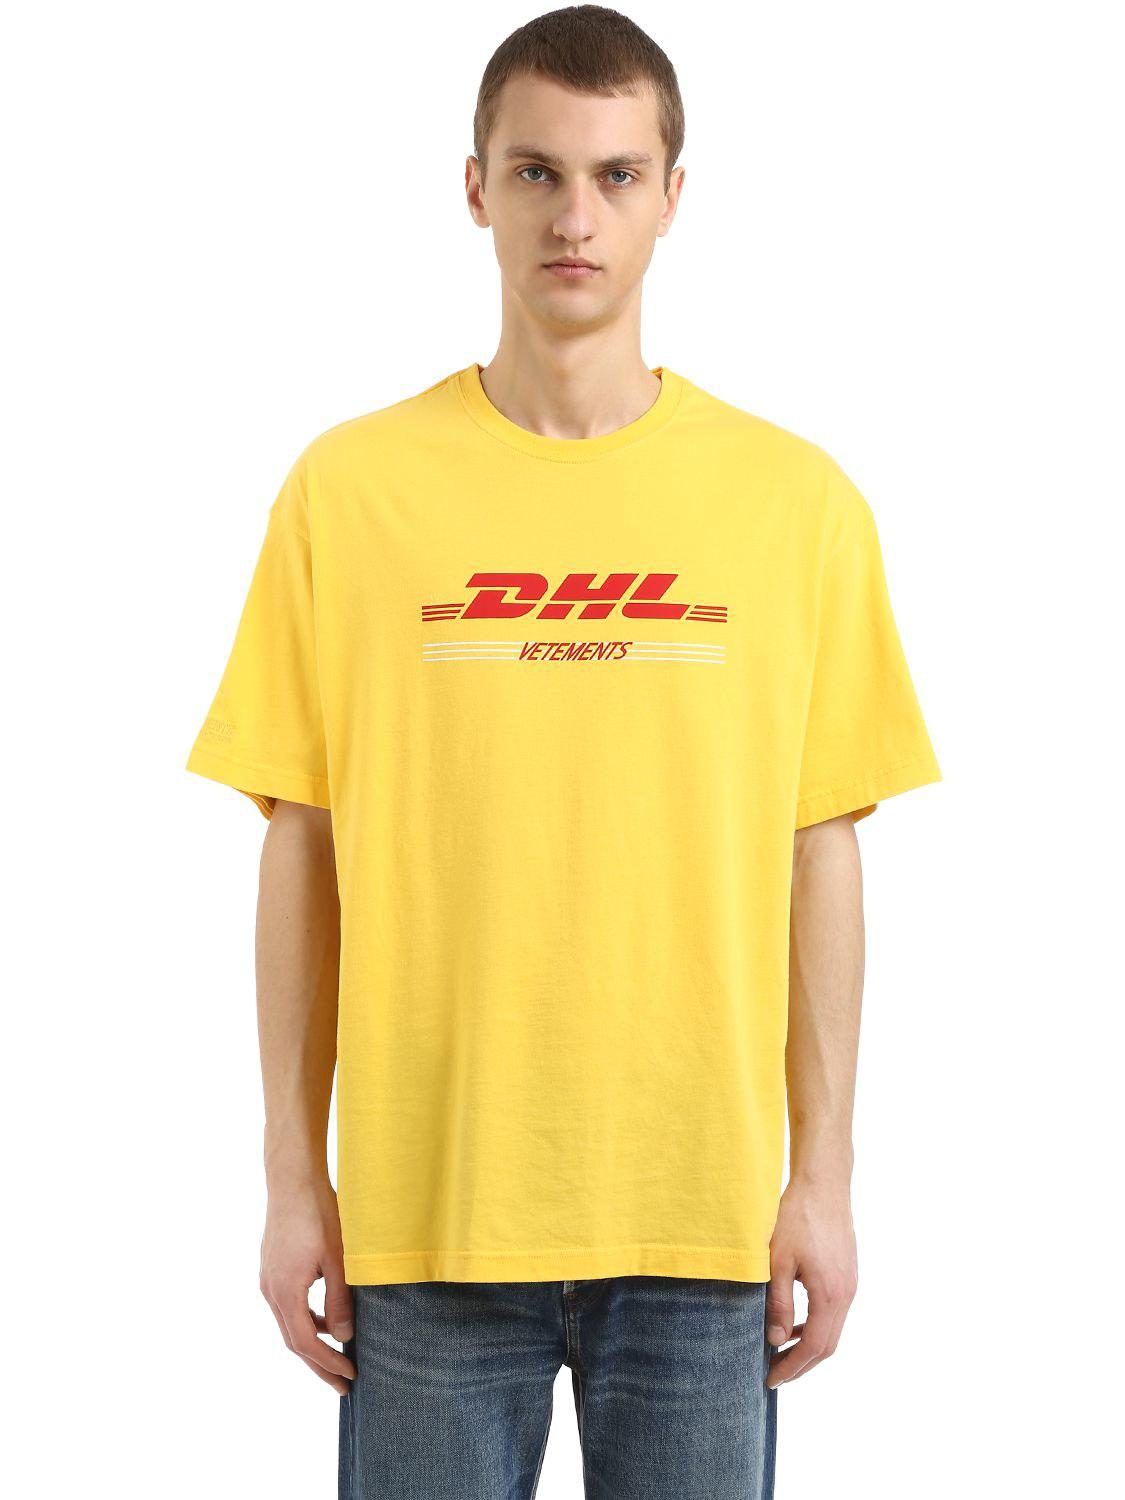 Vetements Dhl Cotton Jersey Double T-shirt in Yellow for Men | Lyst Canada